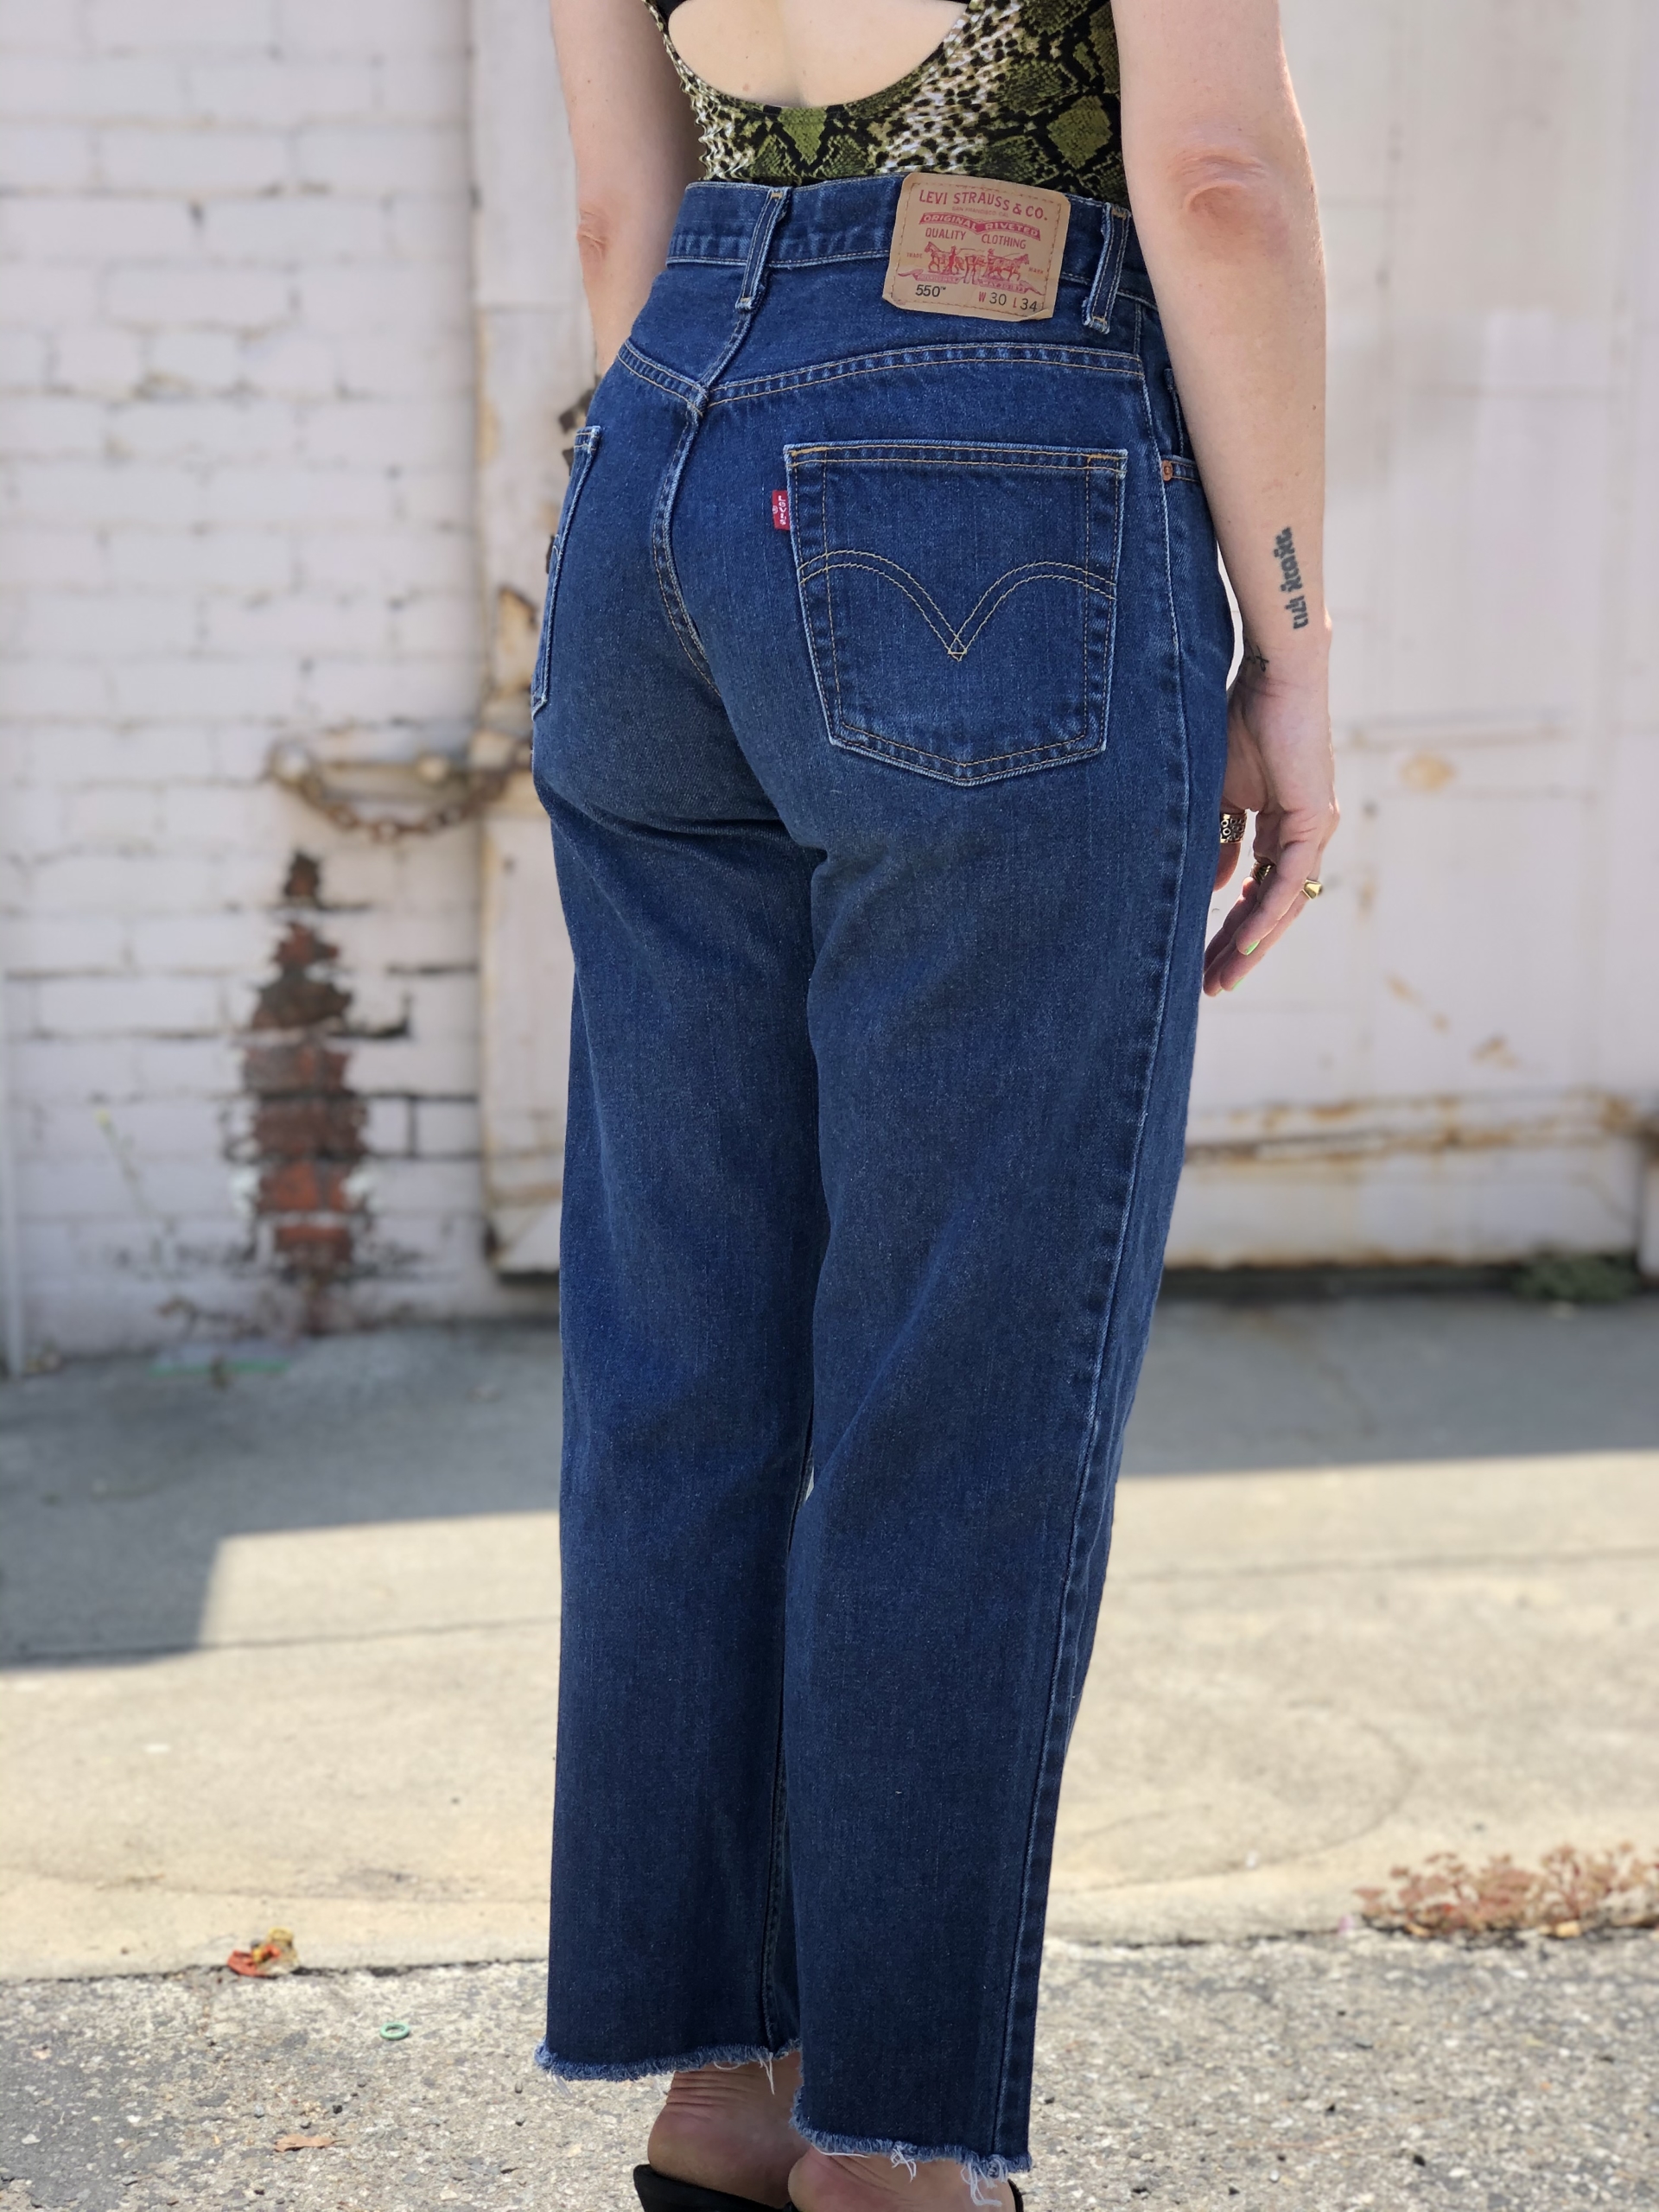 LEVIs 550 Relaxed Fit – M – Hotbox Vintage